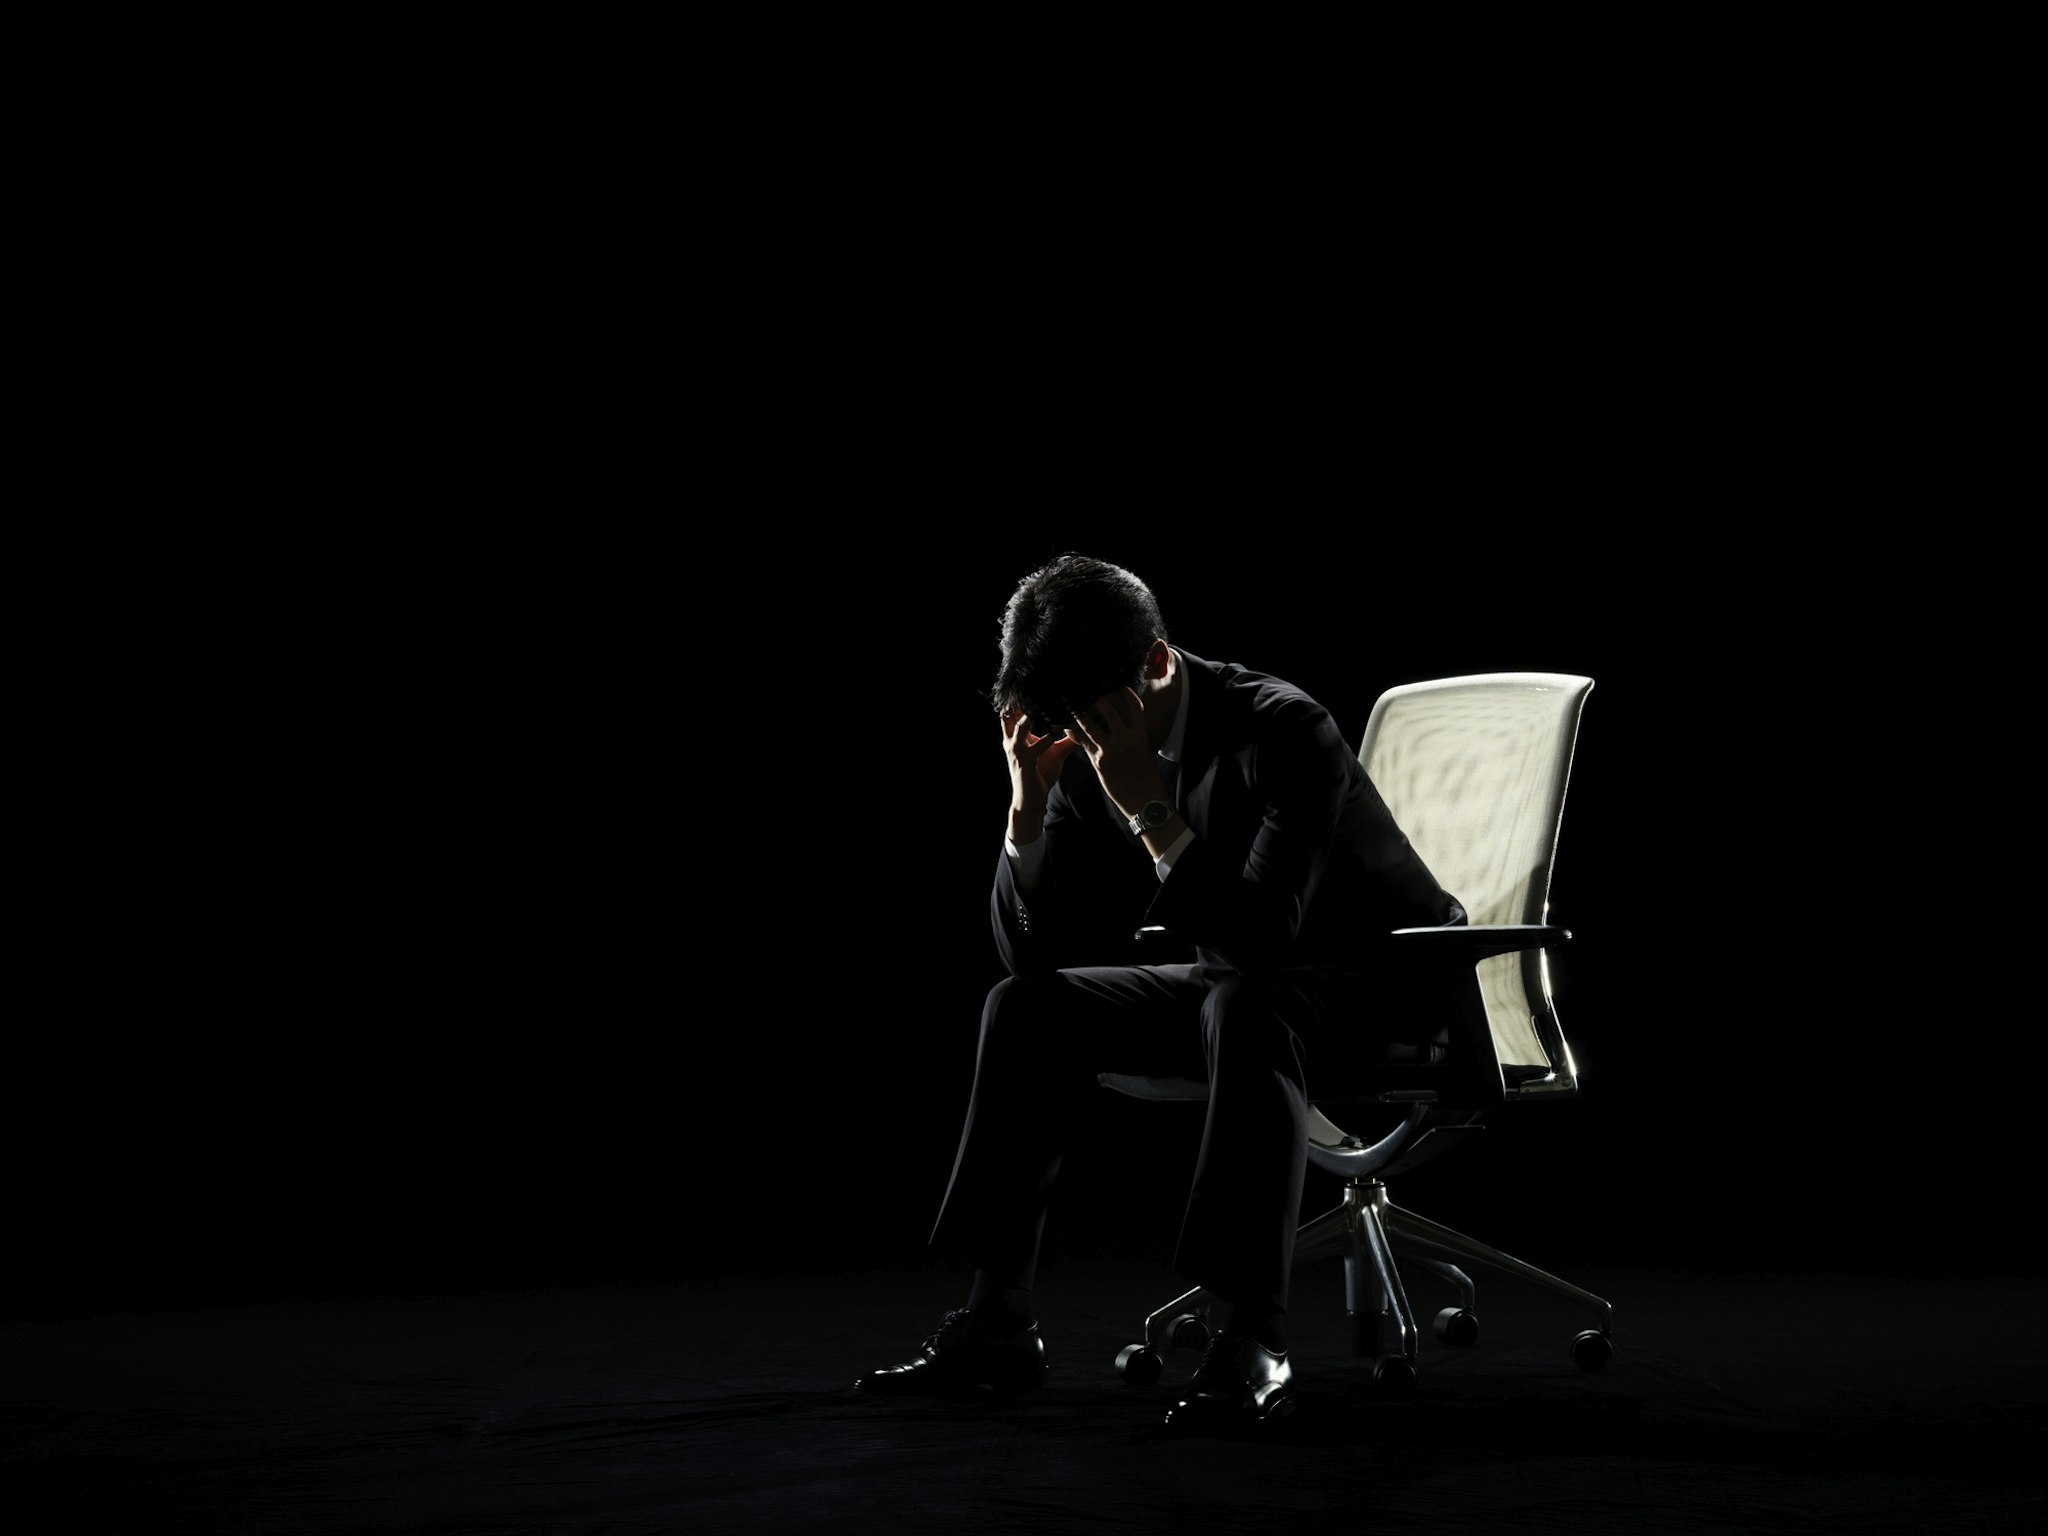 Businessman who sits on chair and worries - stock photo